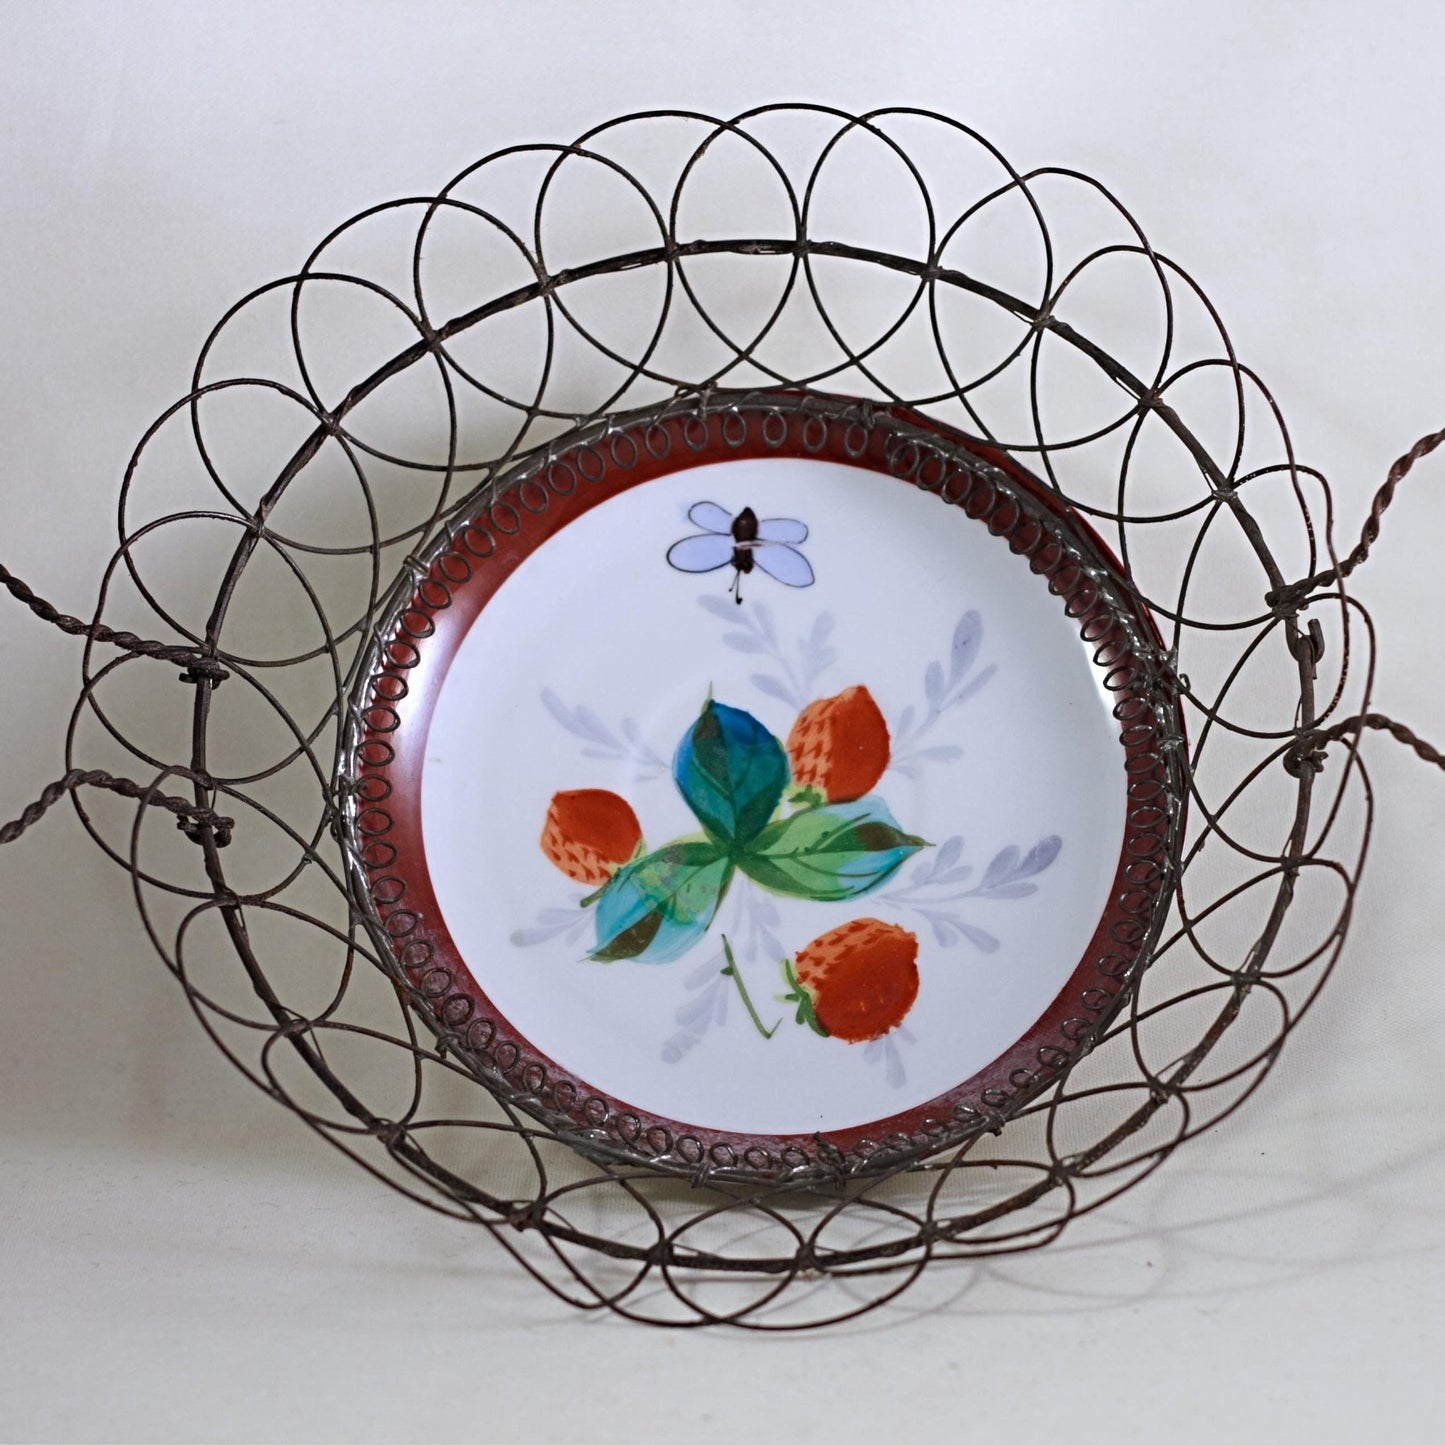 WIRE BUN BASKET with Heart Shaped Handles